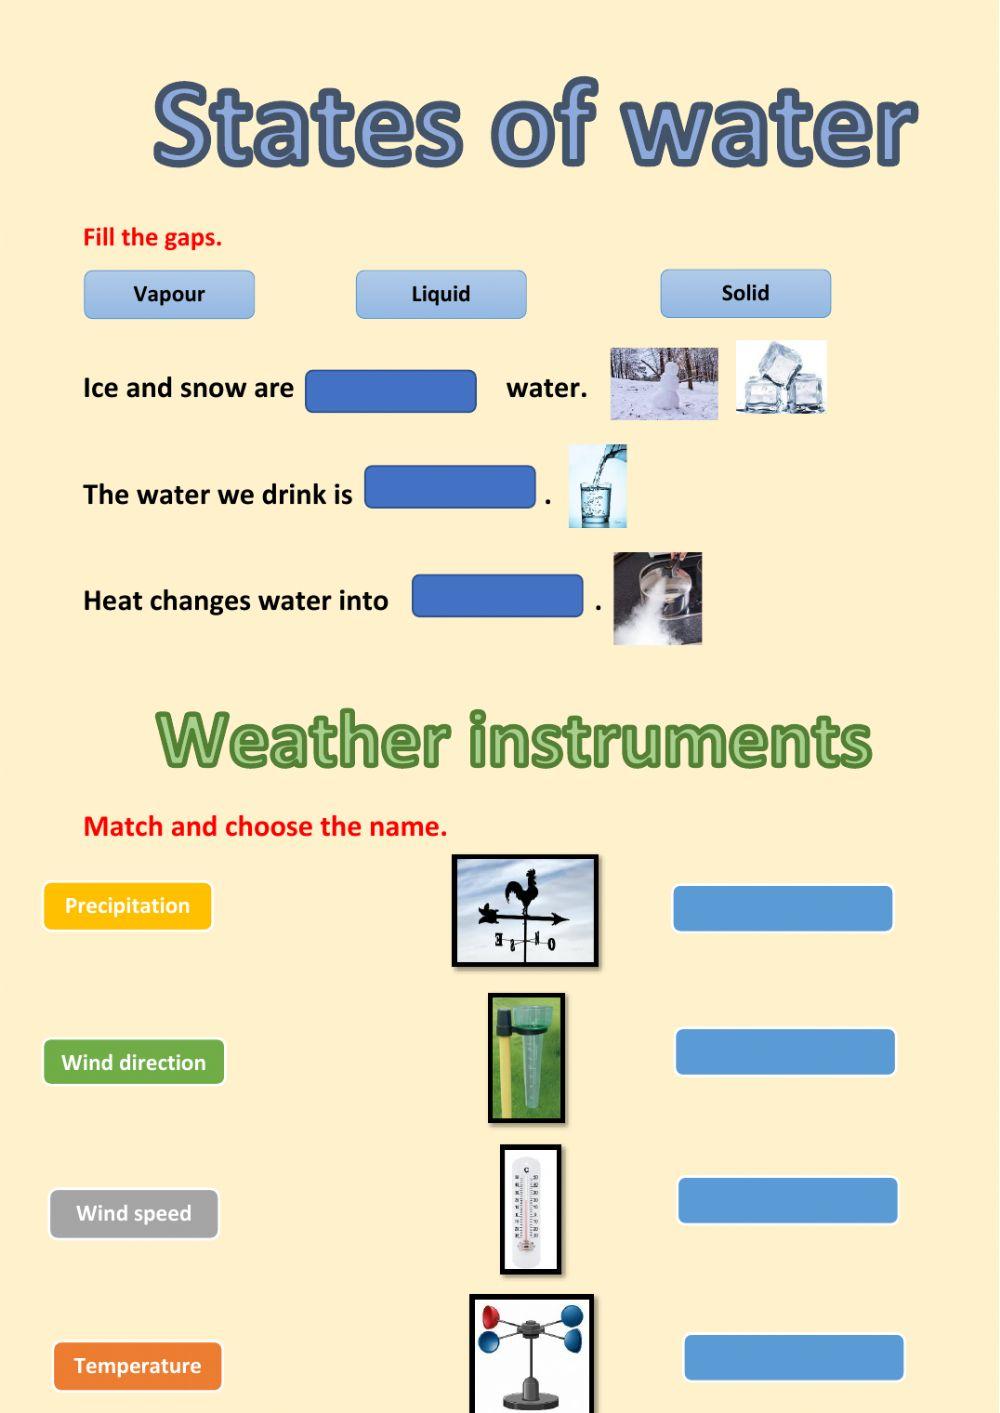 States of water and weather instruments